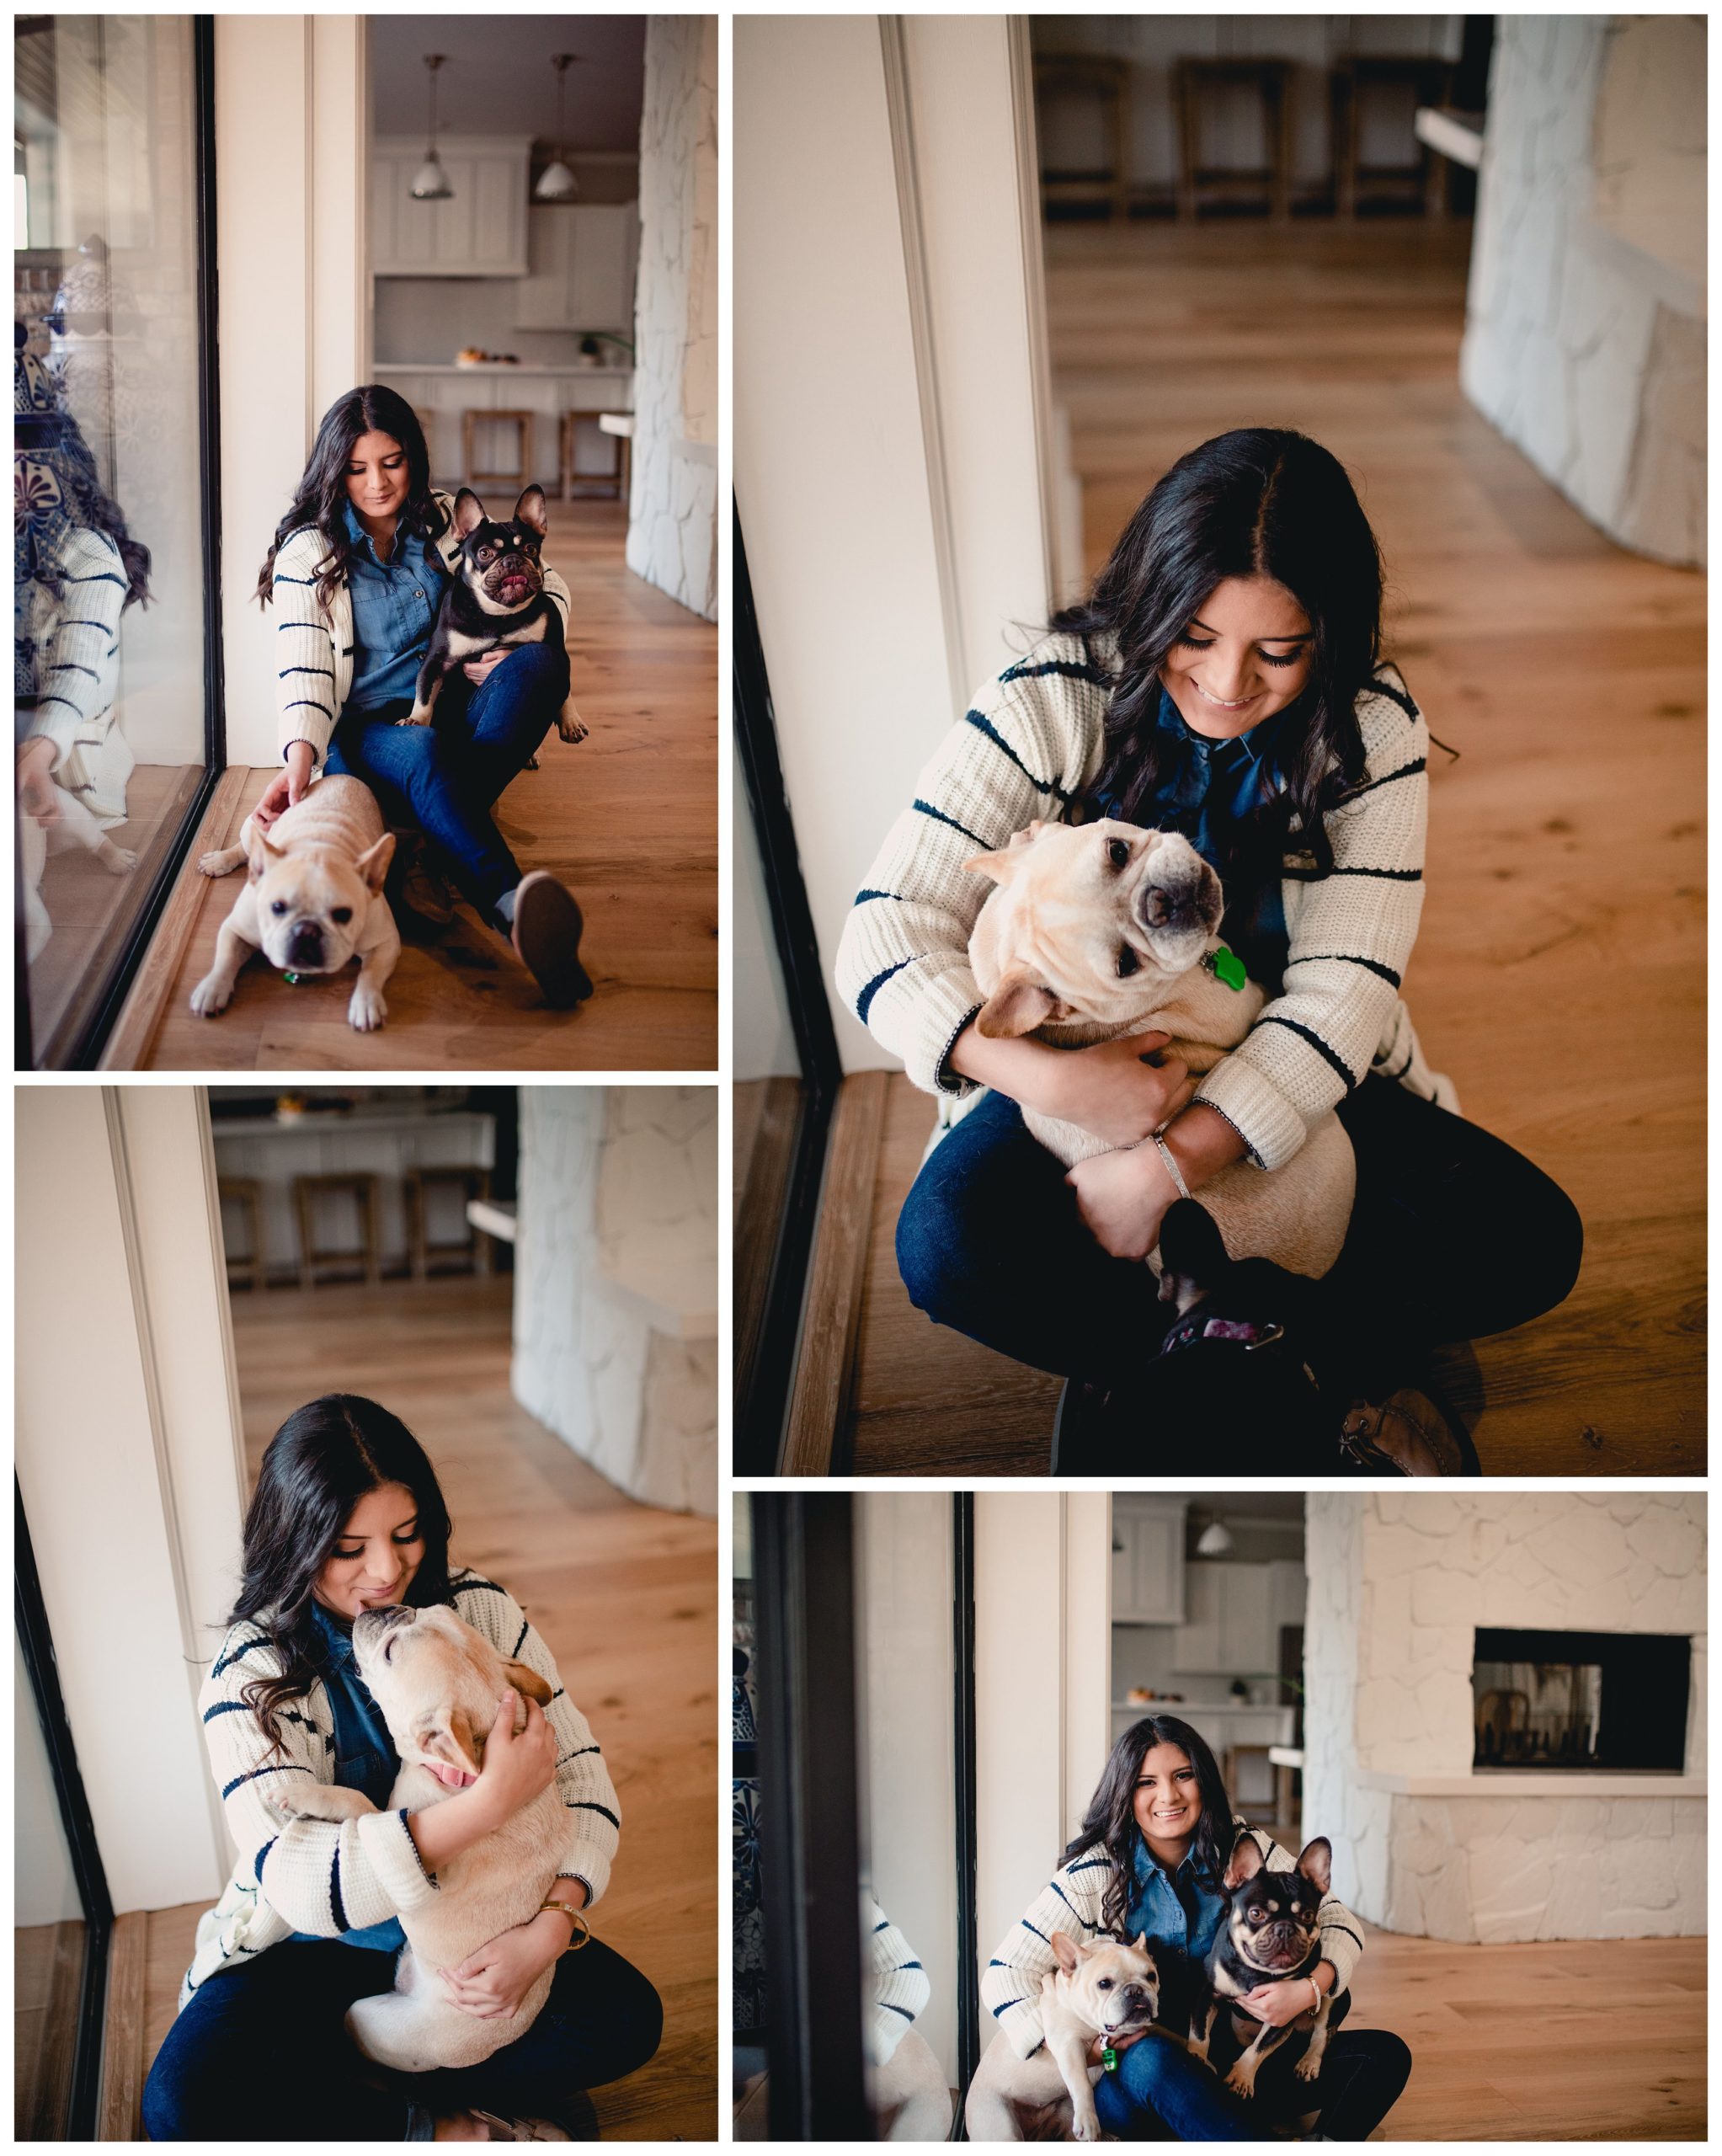 French bulldogs with their owner taking snuggly pet photos.